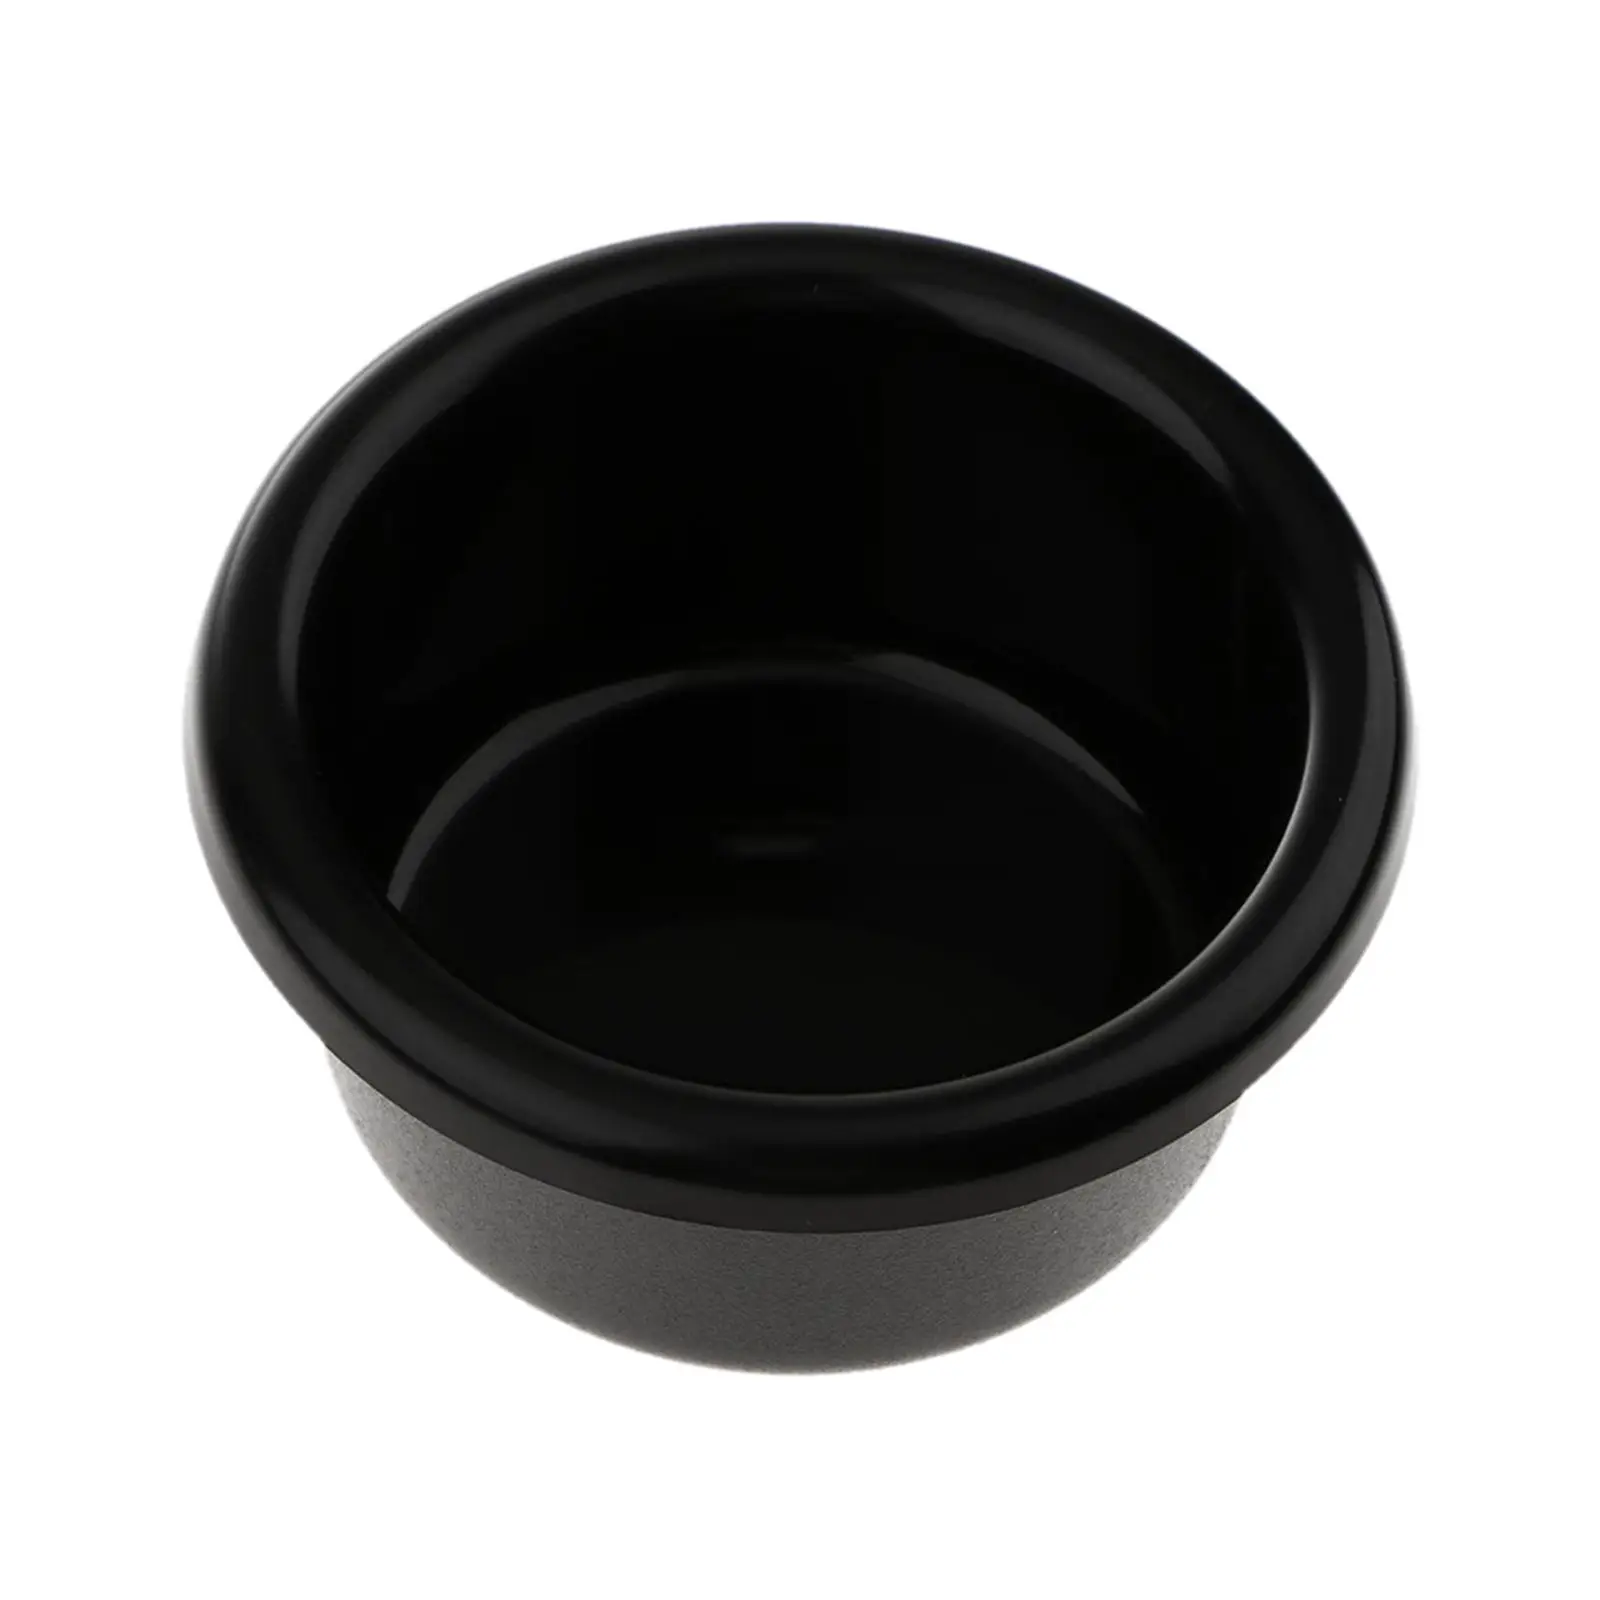 Universal Black Plastic Cup Drink Can Holder 100mm Dia for Boat Marine RV Install almost anywhere table counter top dashboard